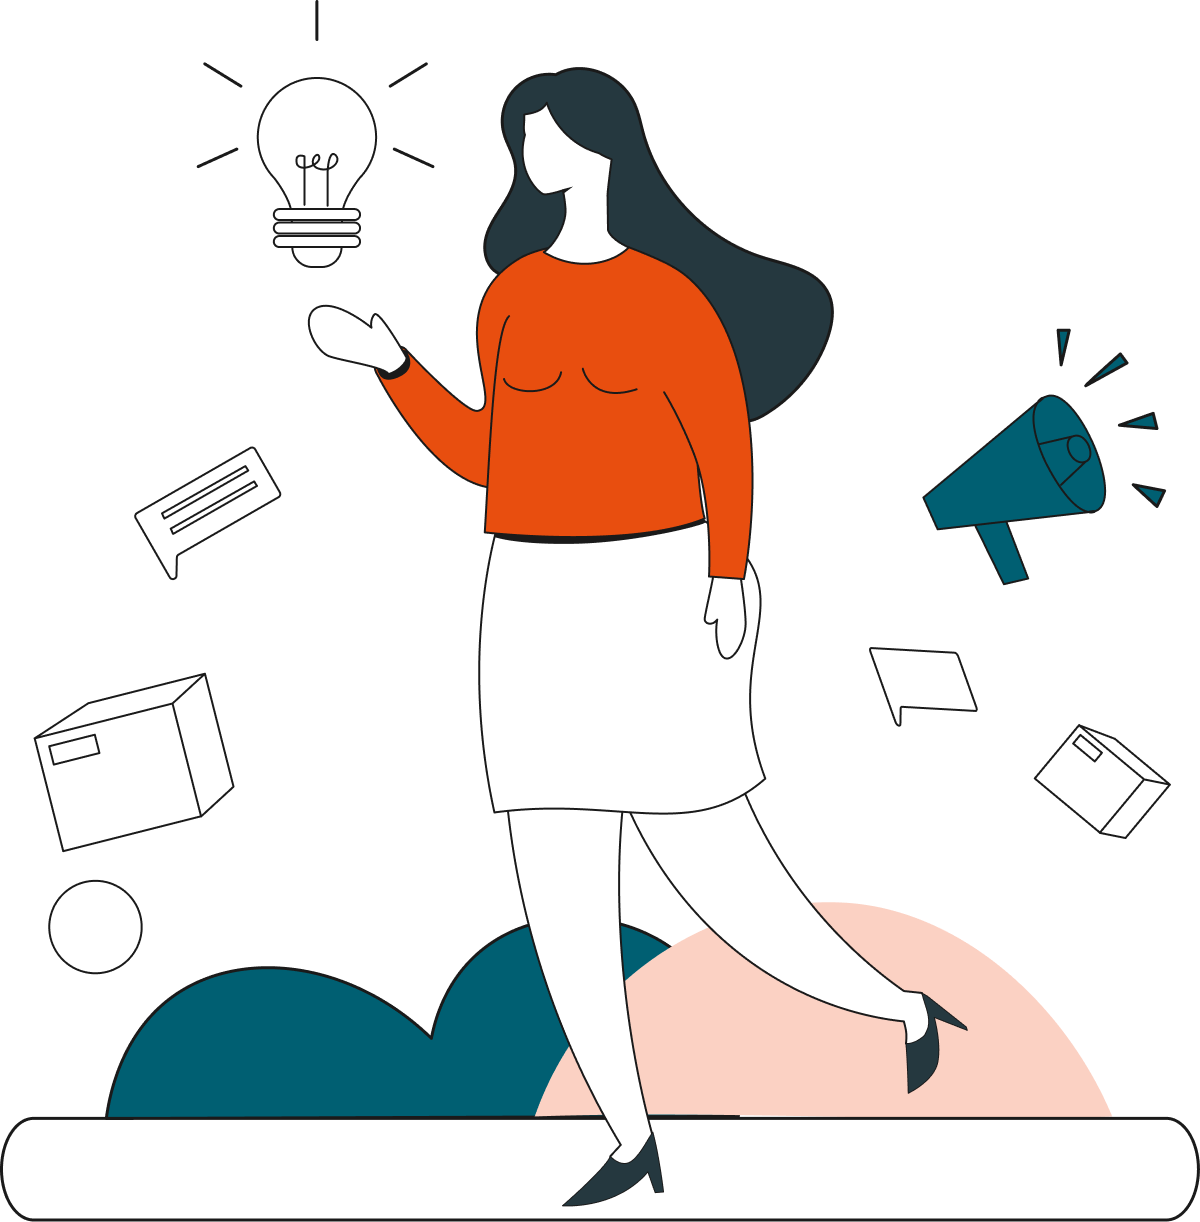 An illustration of a woman surrounded by various icons, the most prominent one being a lightbulb.